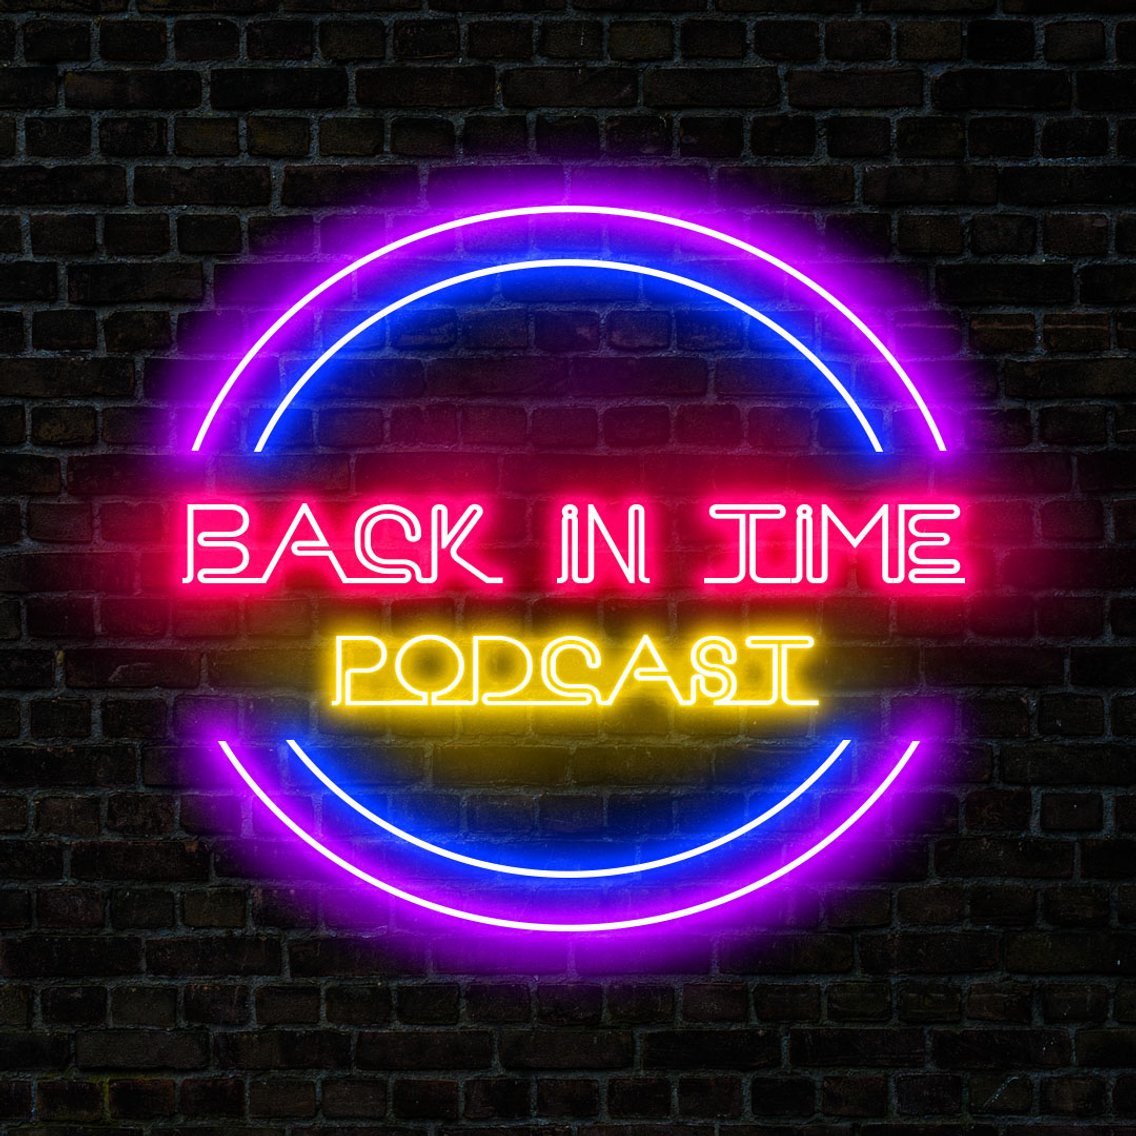 Back in Time Podcast - Cover Image